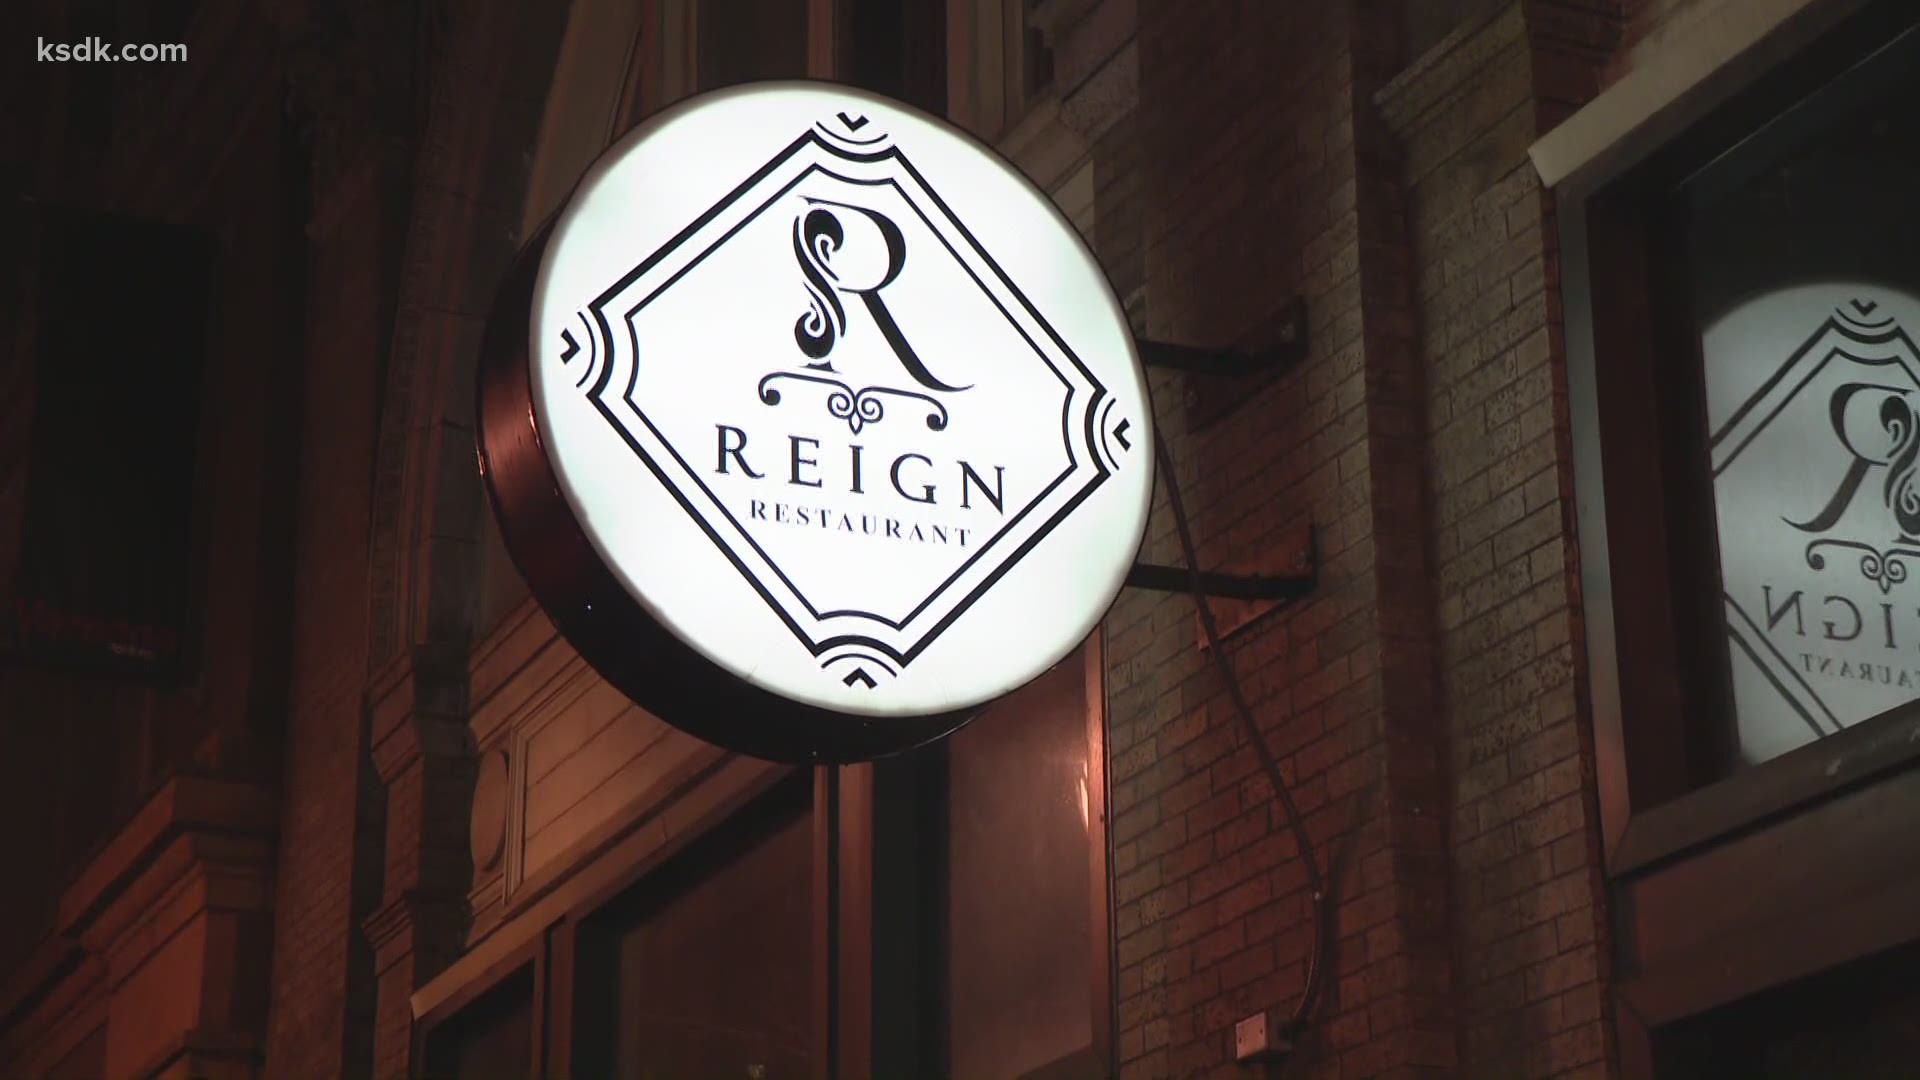 Reign Restaurant must close immediately, according to a letter from St. Louis Acting Director of Health Dr. Fredrick L. Echols